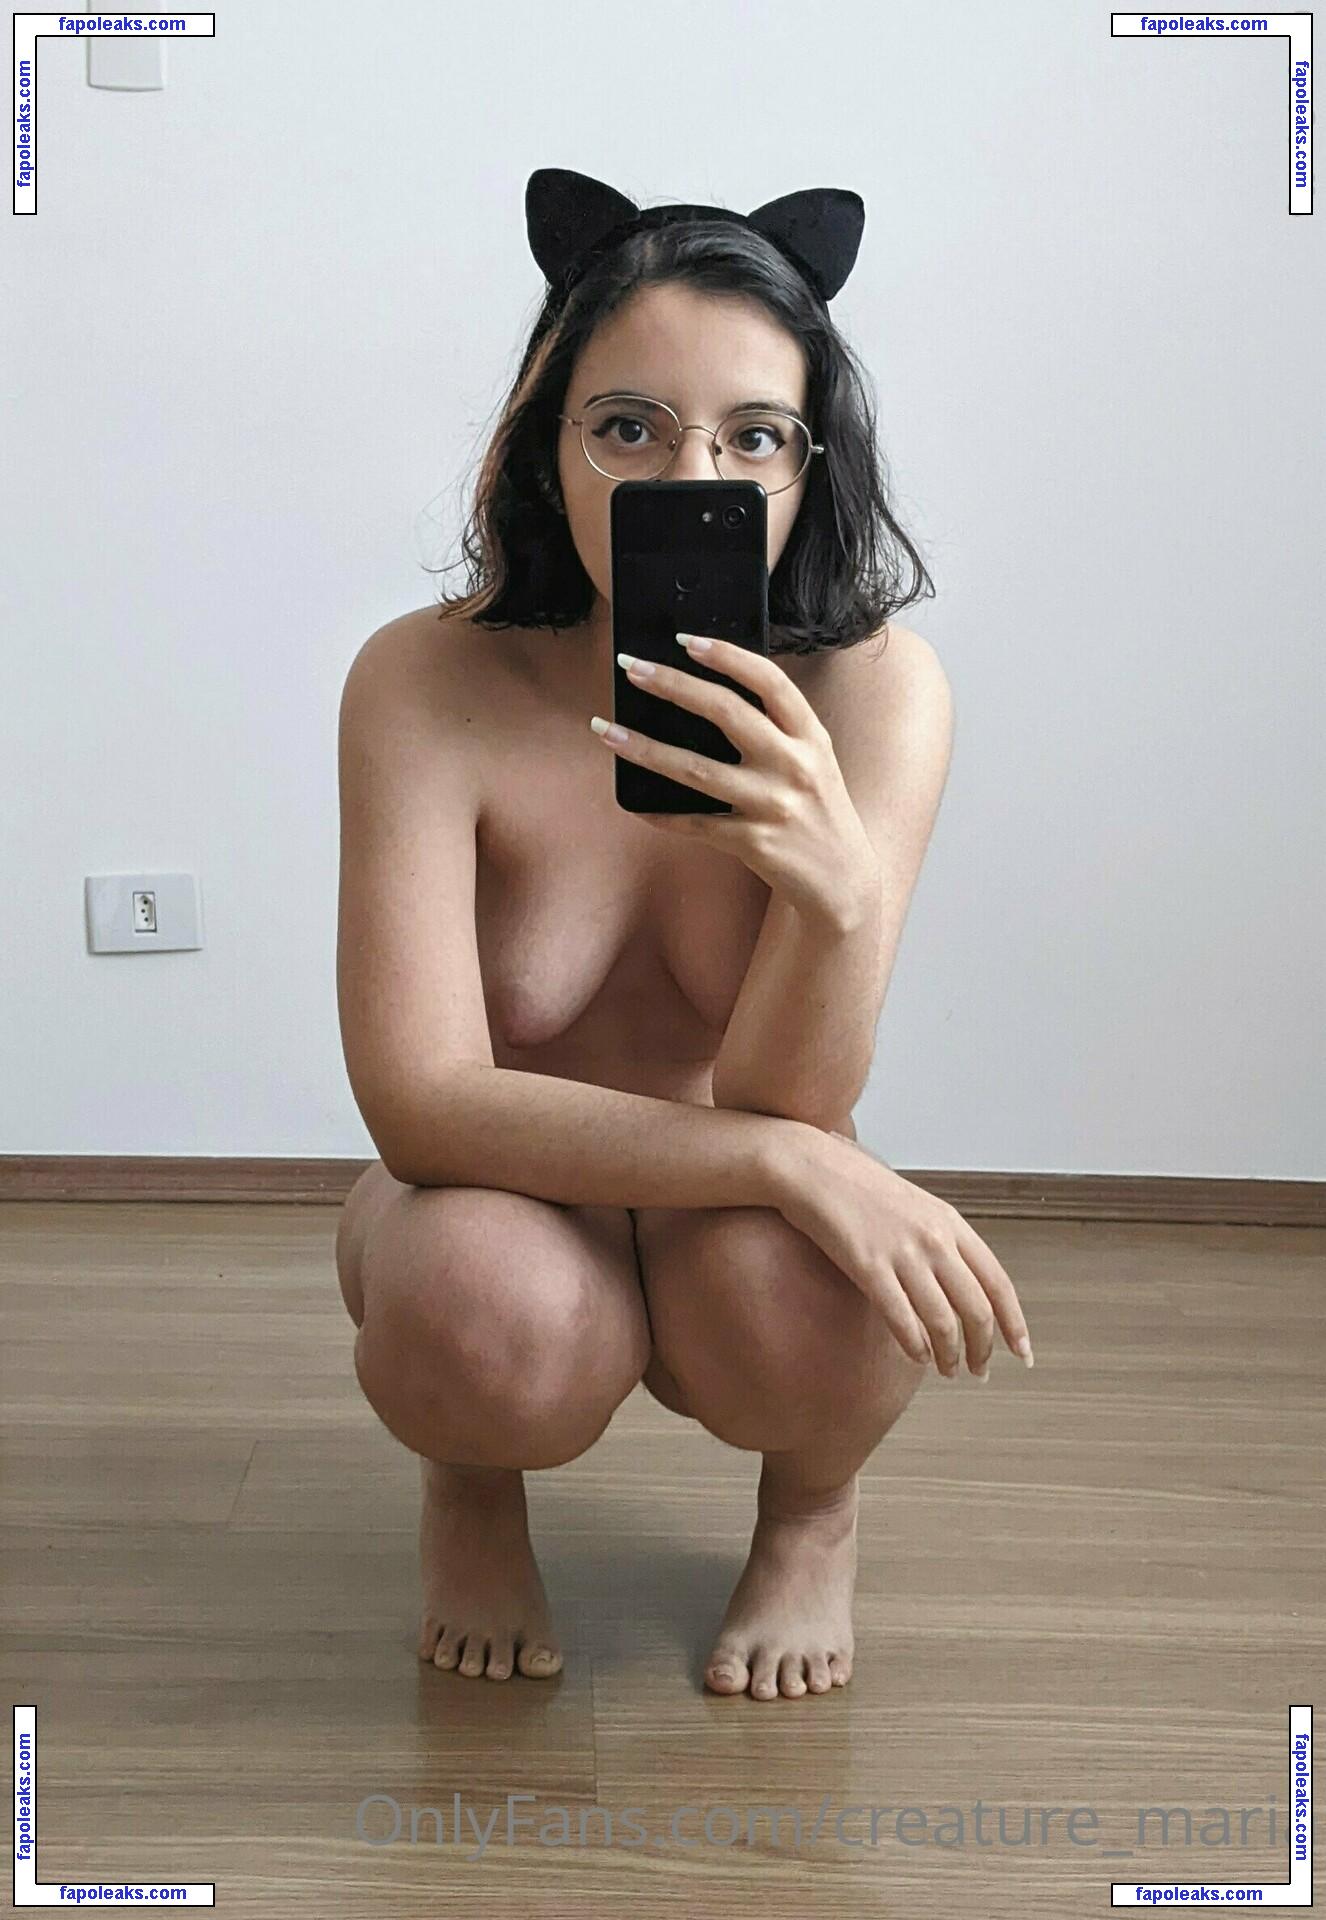 Creature Maria / creature_maria nude photo #0079 from OnlyFans